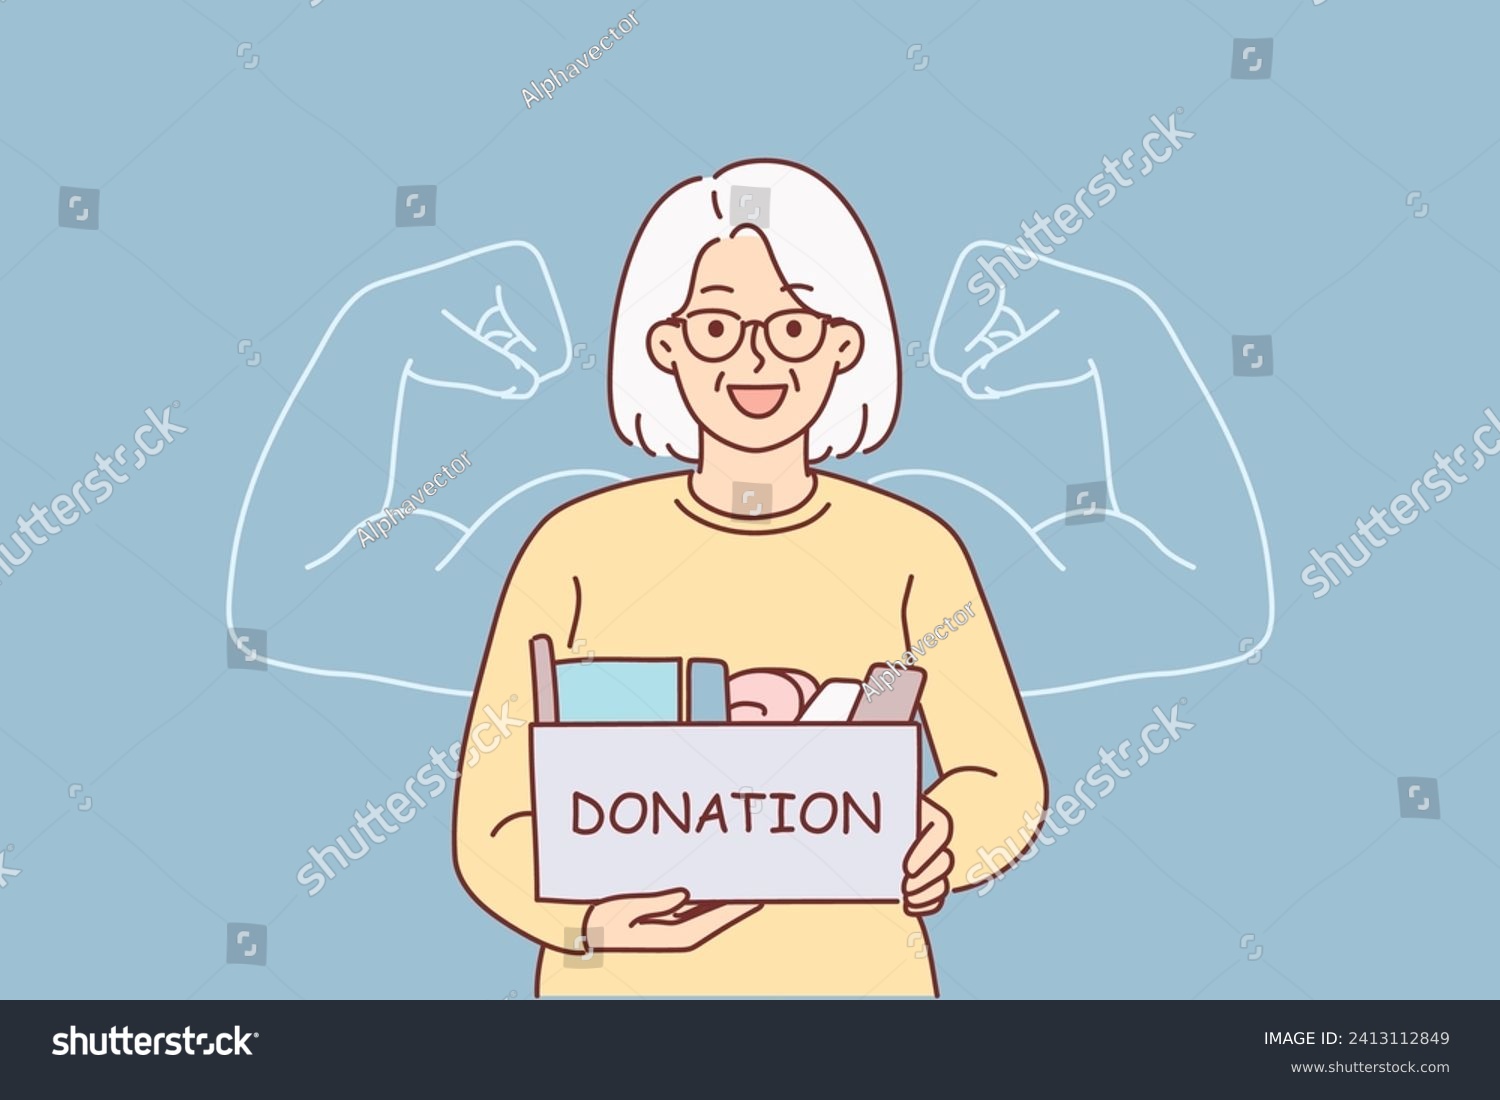 SVG of Grandmother holds donation box, wanting to help needy people in trouble, stands near phantom biceps. Concept gaining self-confidence through volunteering and collecting donation box for those in need svg